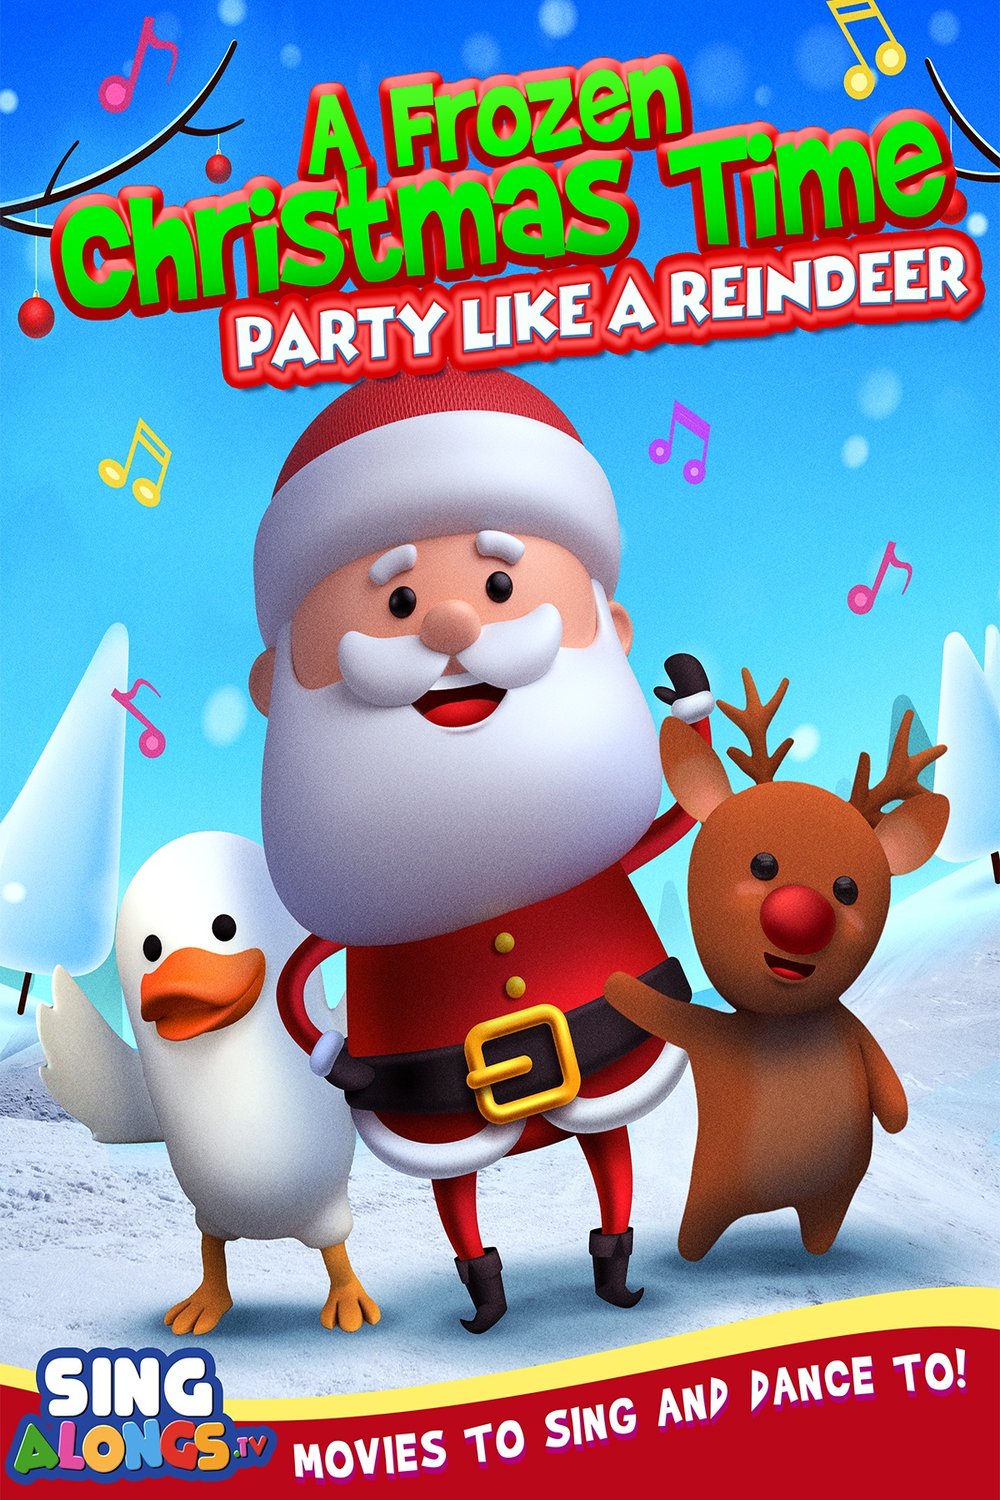 Poster of the movie A Frozen Christmas Dance: Party Like A Reindeer